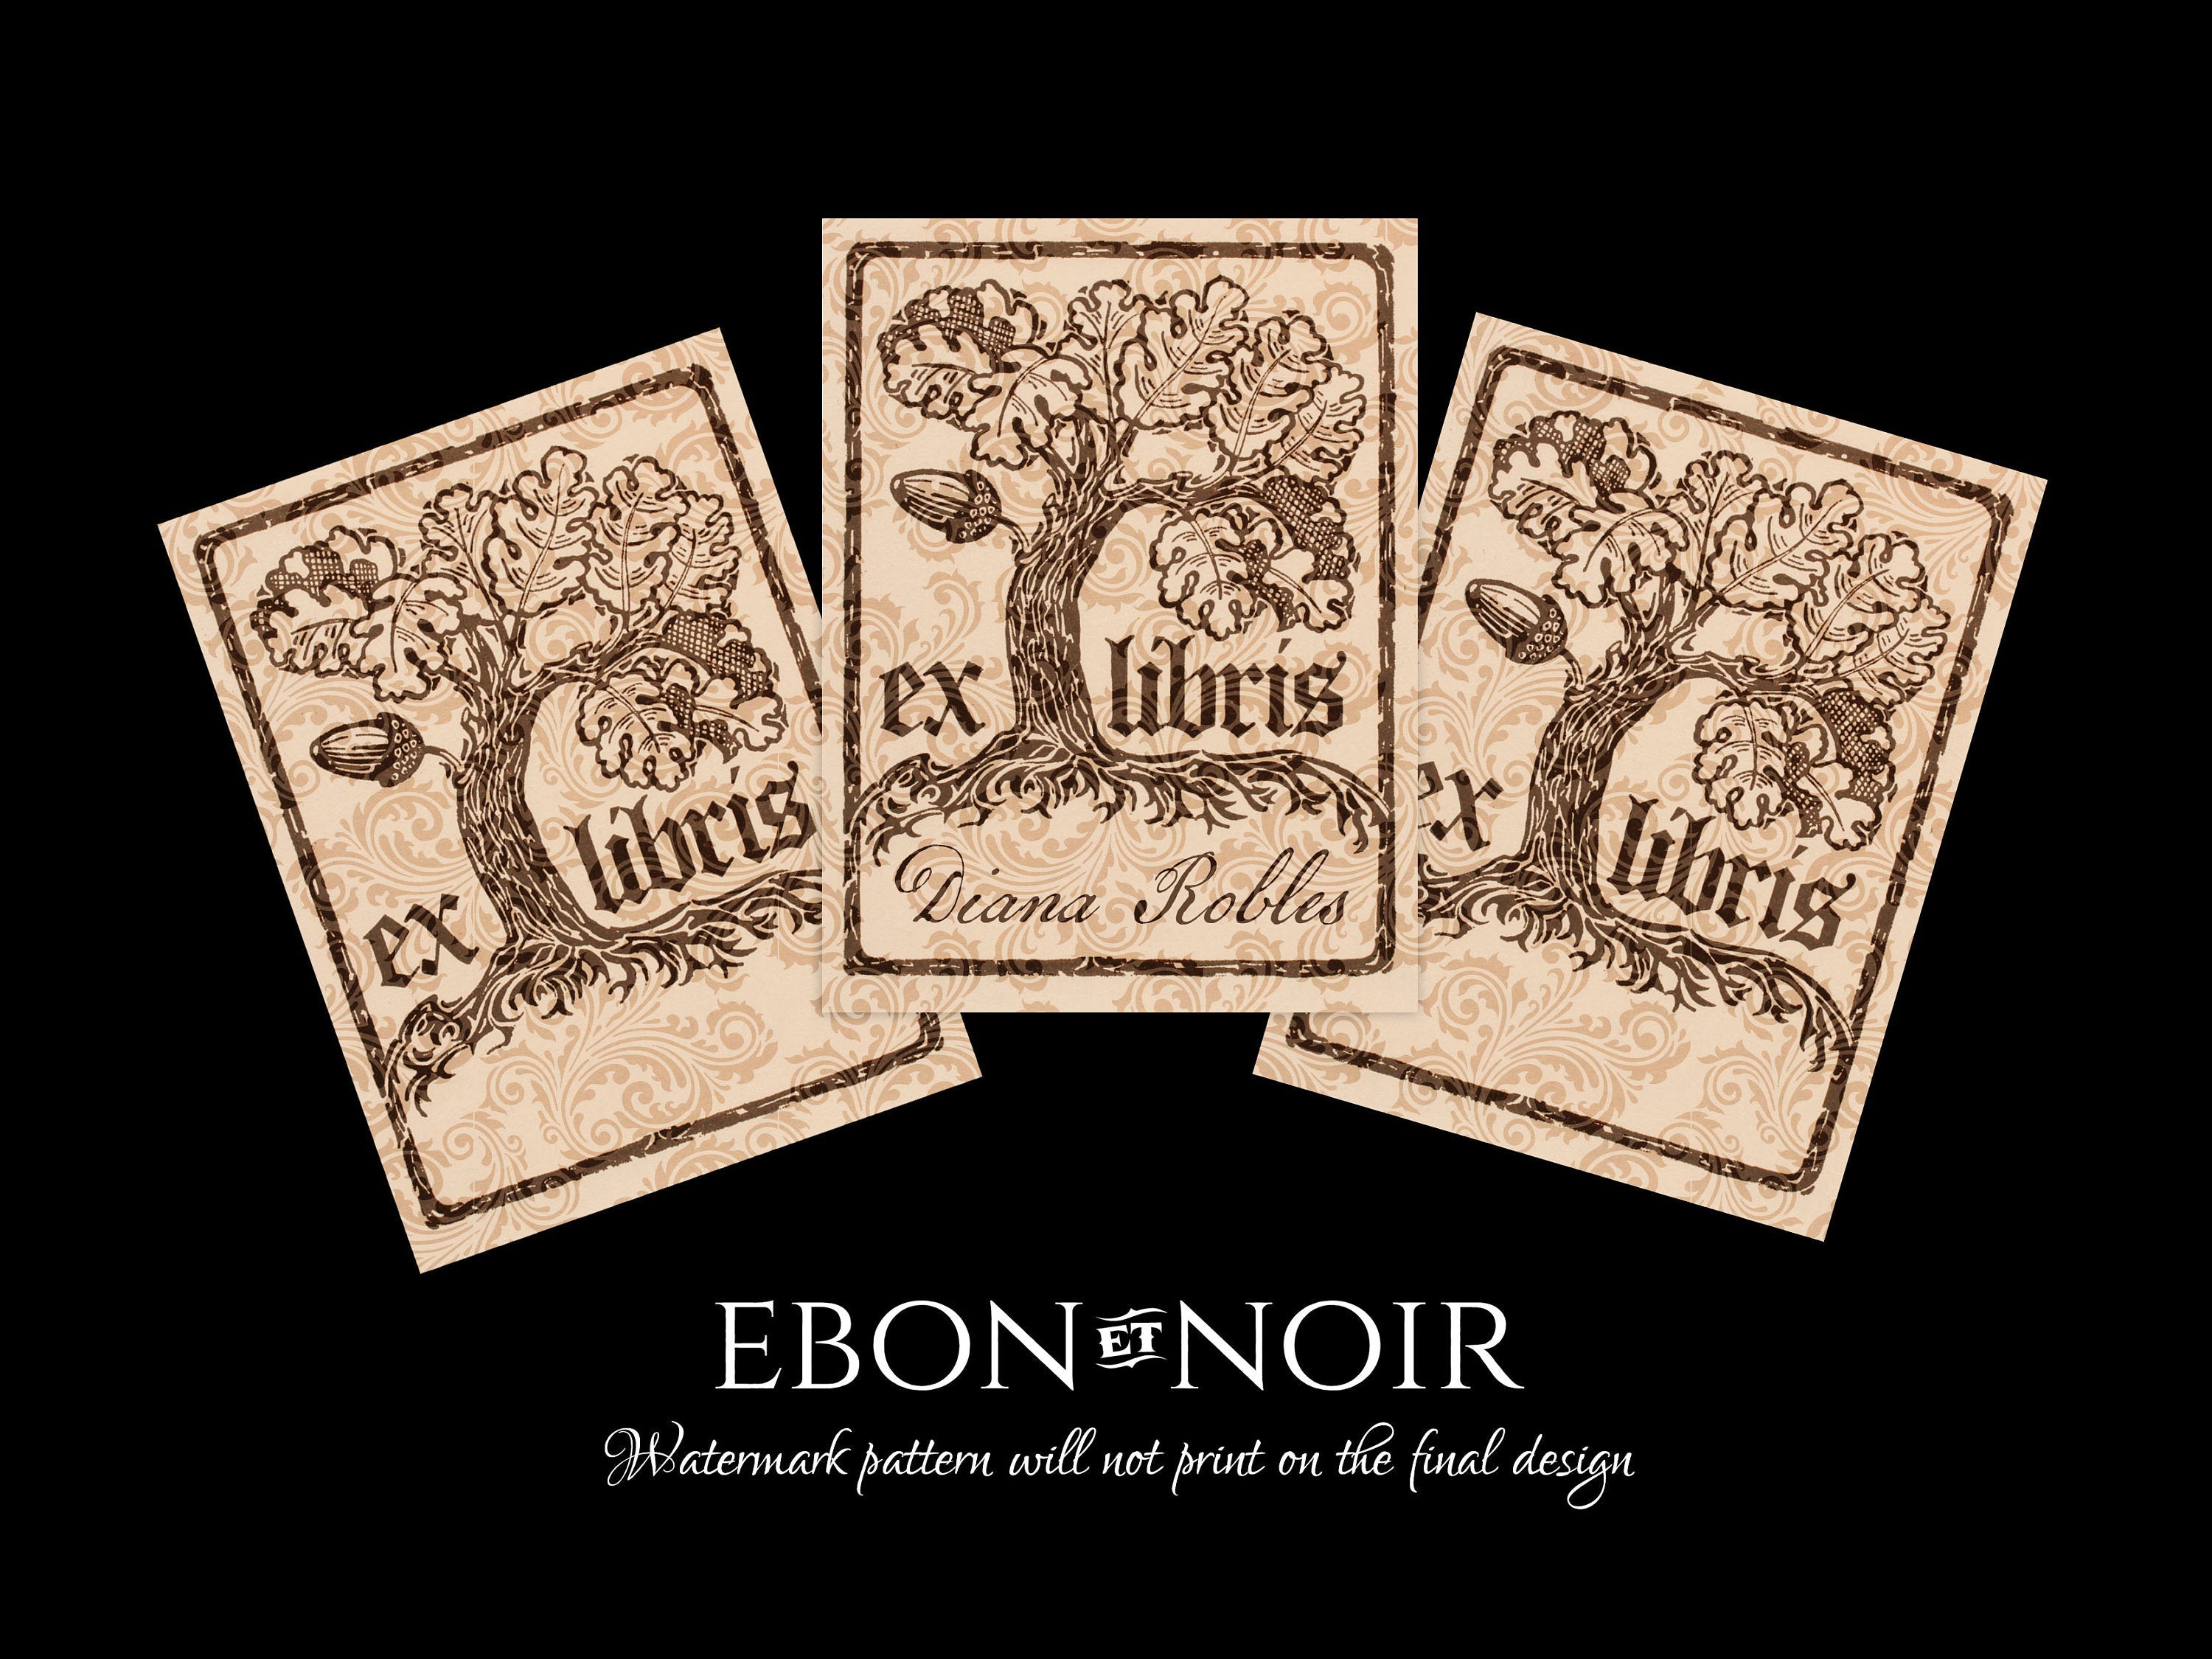 Oak and Acorn, Personalized Ex-Libris Bookplates, Crafted on Traditional Gummed Paper, 3in x 4in, Set of 30